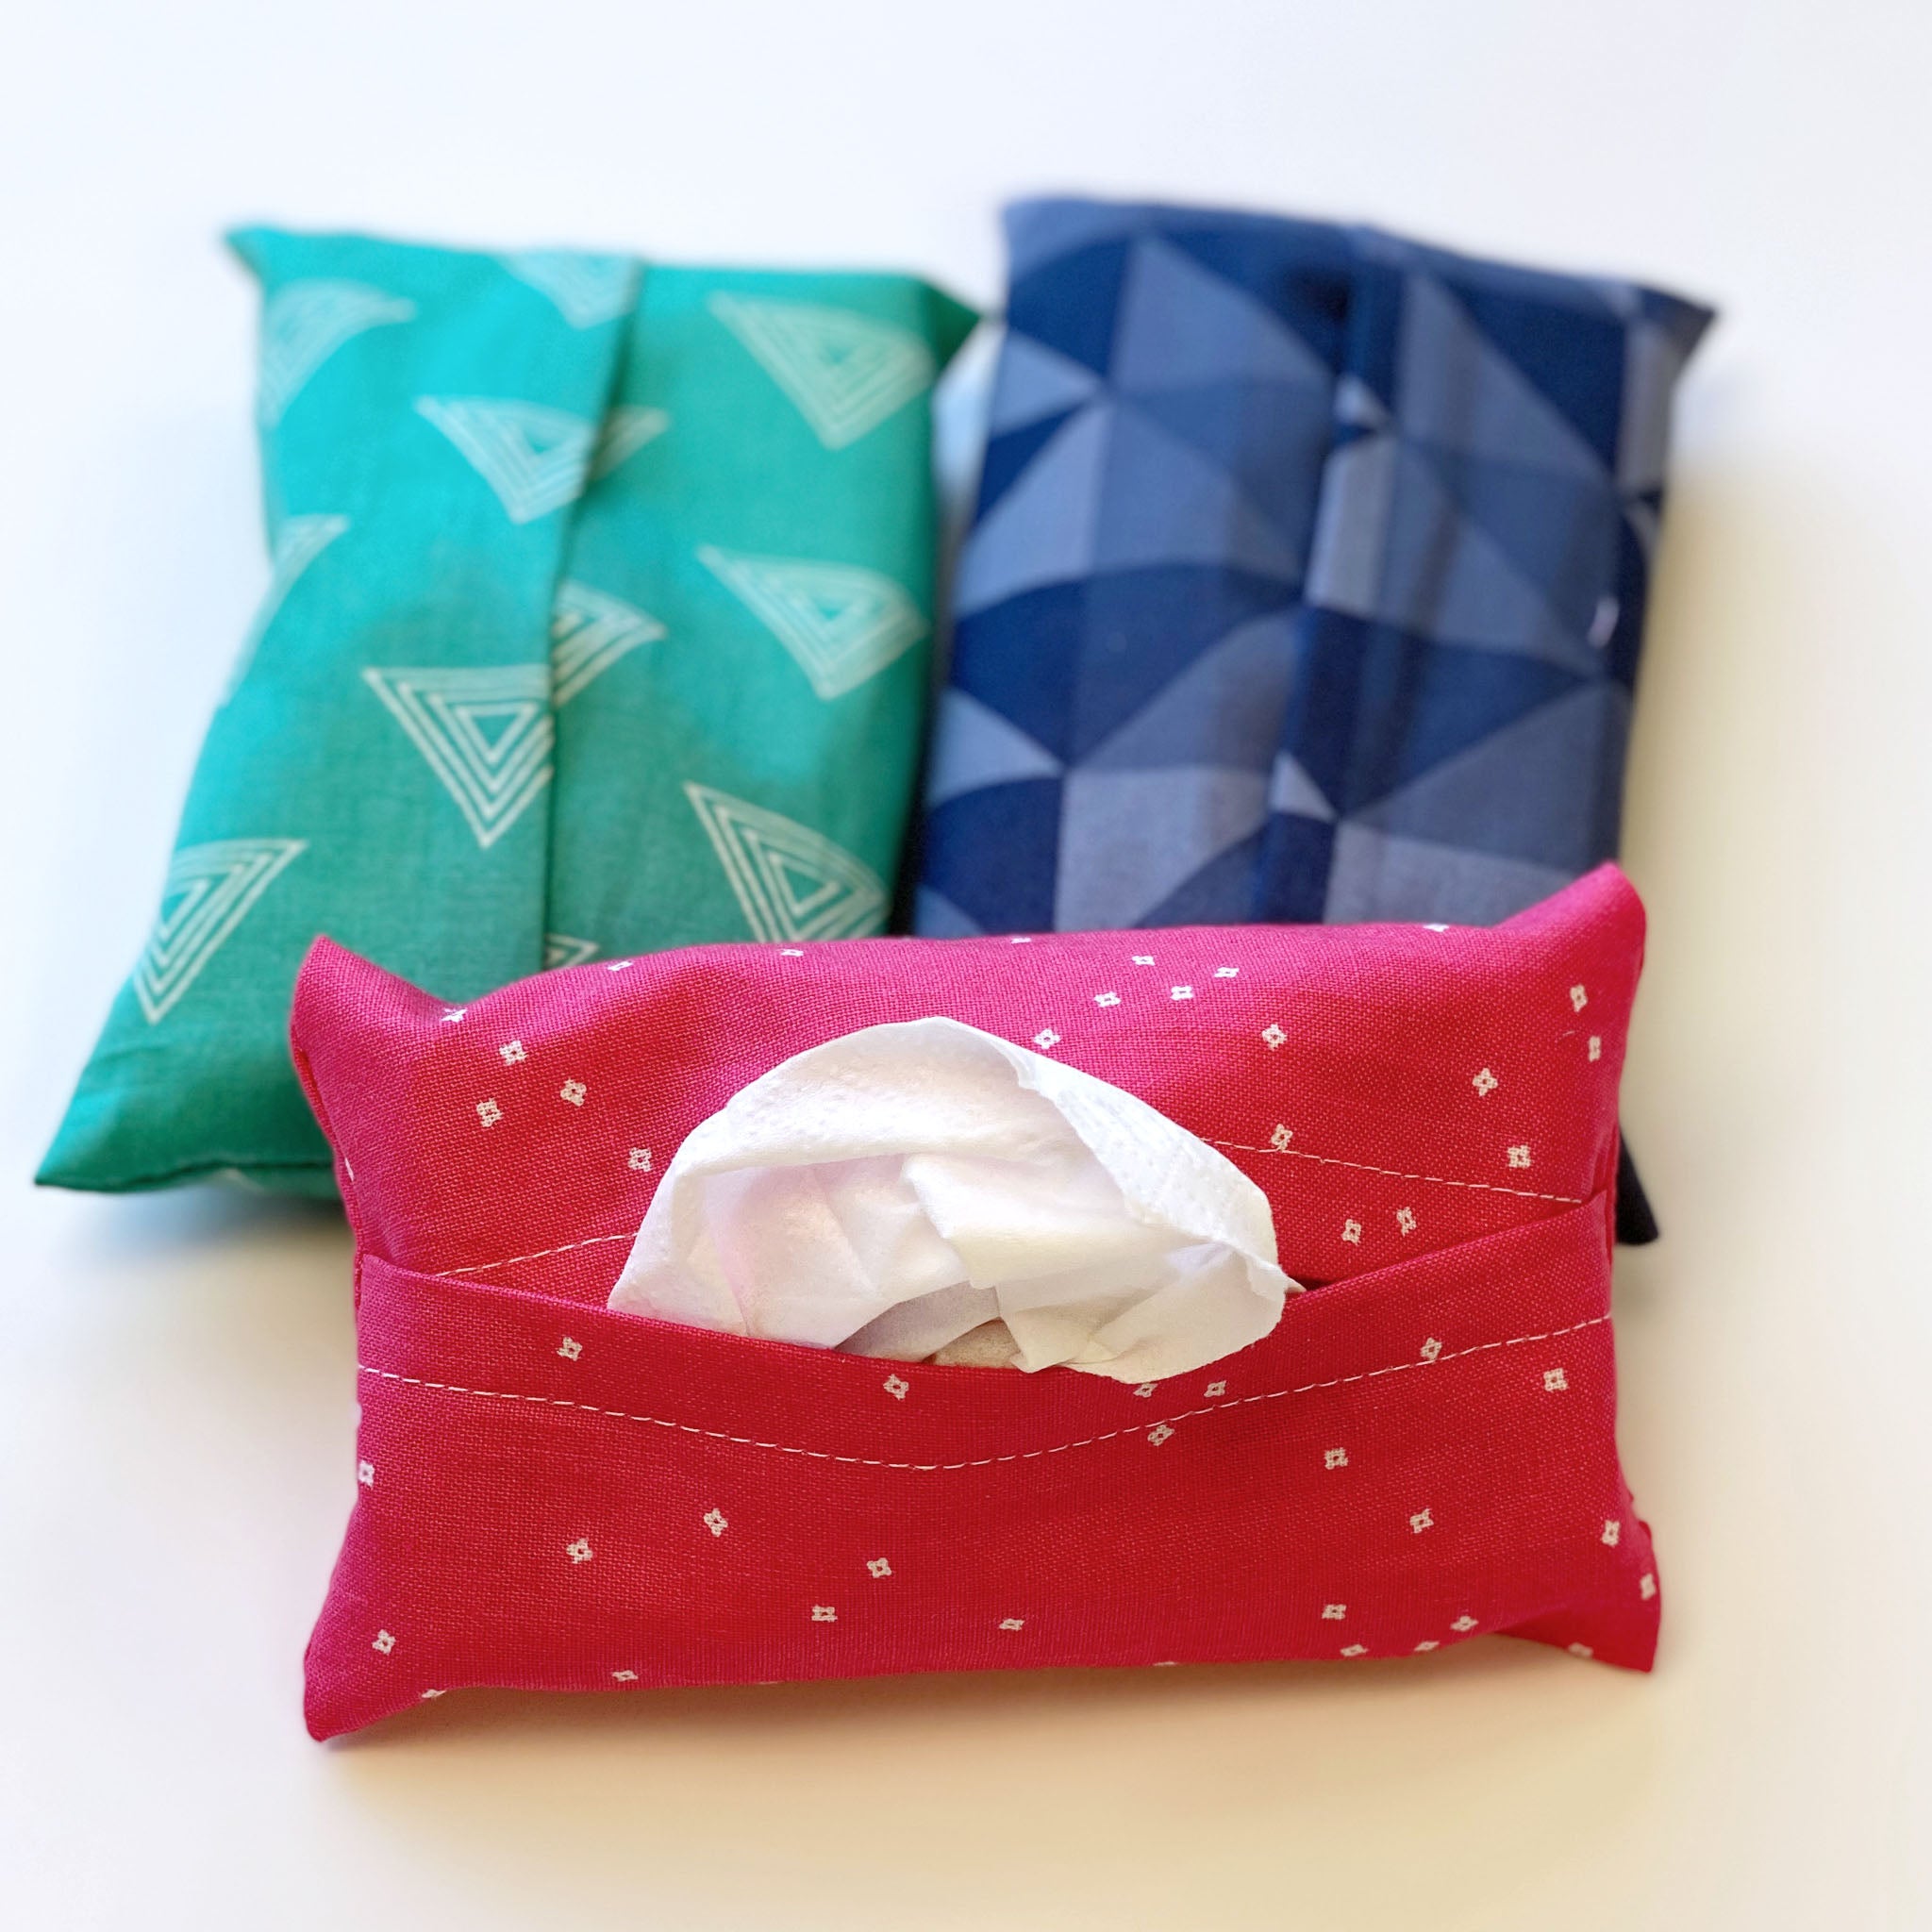 Travel Tissue Cover - Beginner Sewing Pattern & Video Tutorial